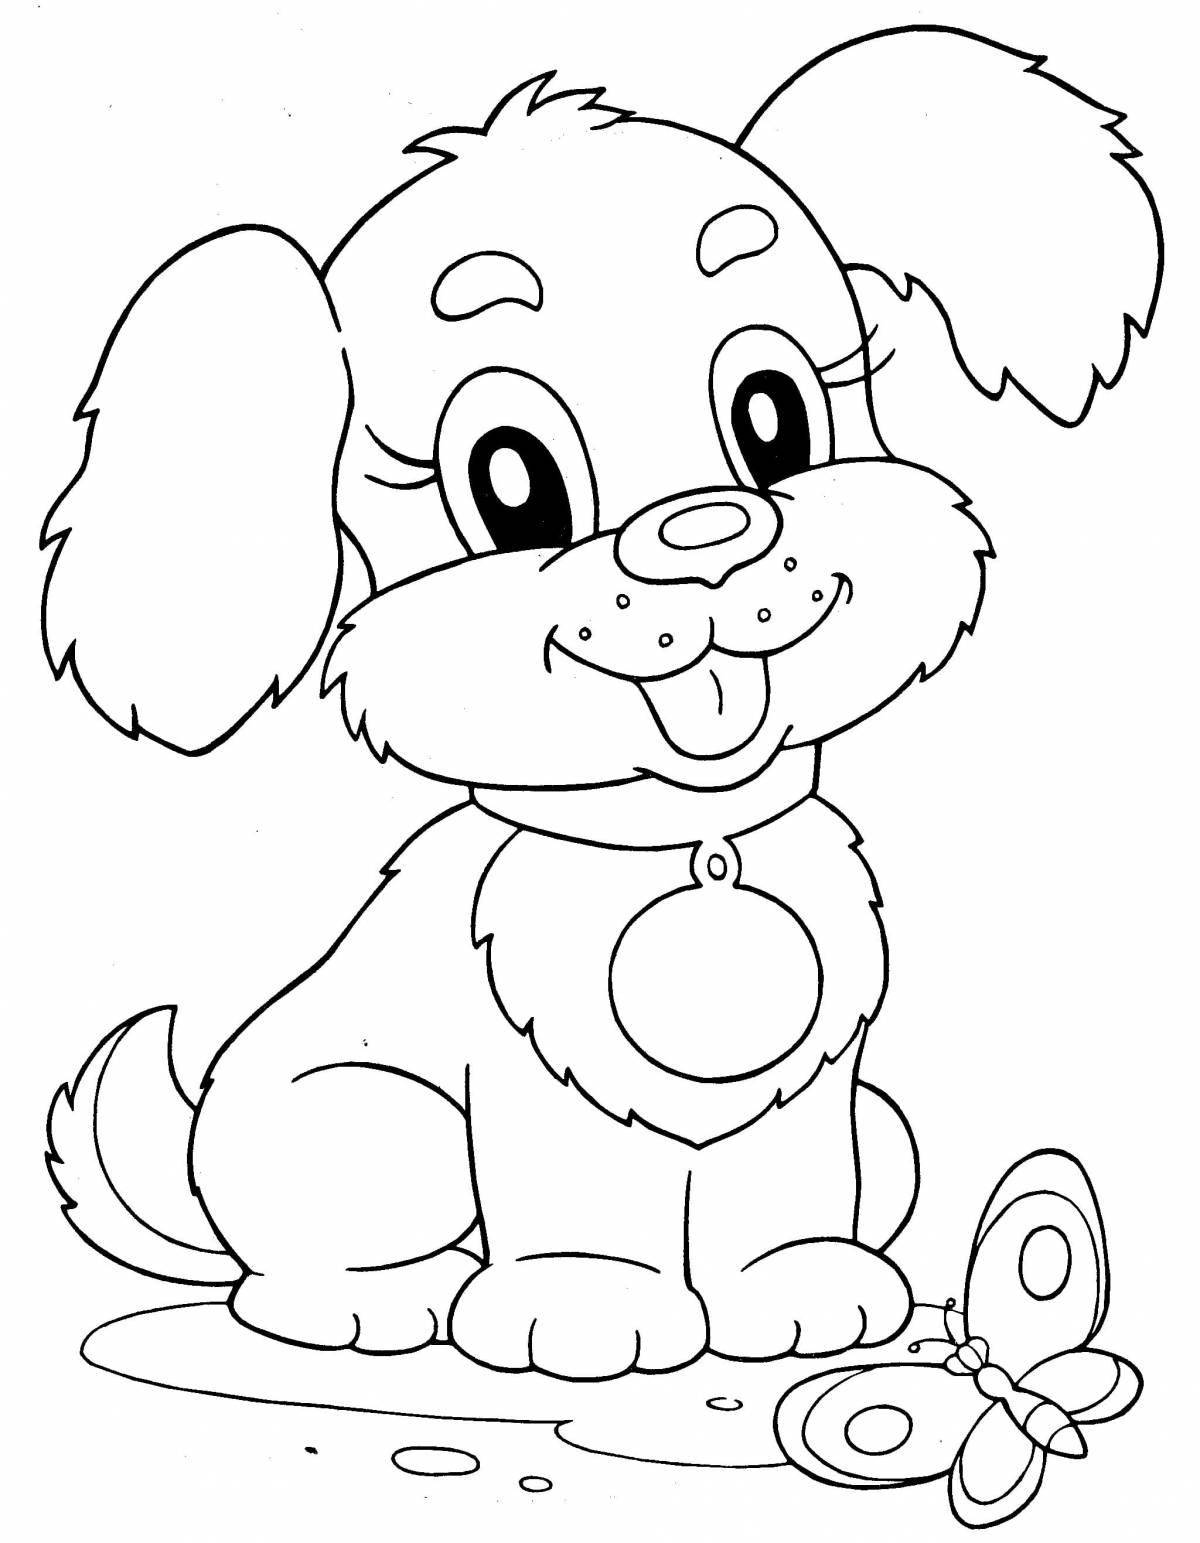 Coloring book for kids #2